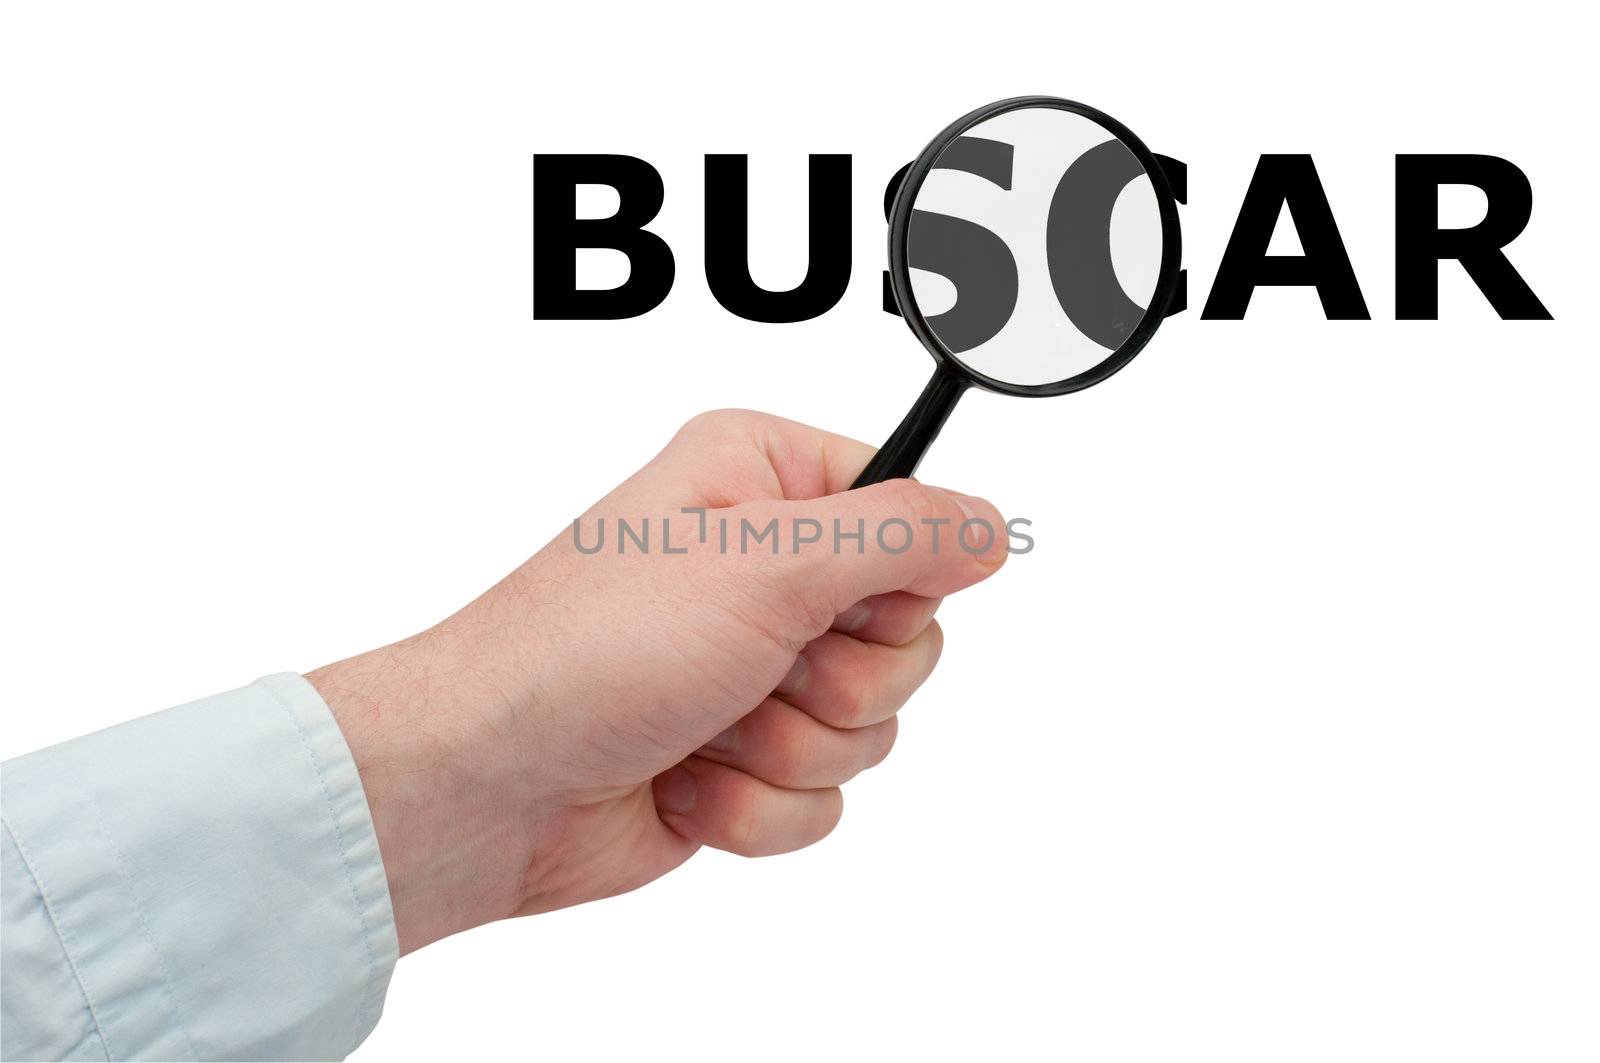 Searching - Man's Hand Holding Magnifying Glass and Search / Buscar Sign - Spanish Version 